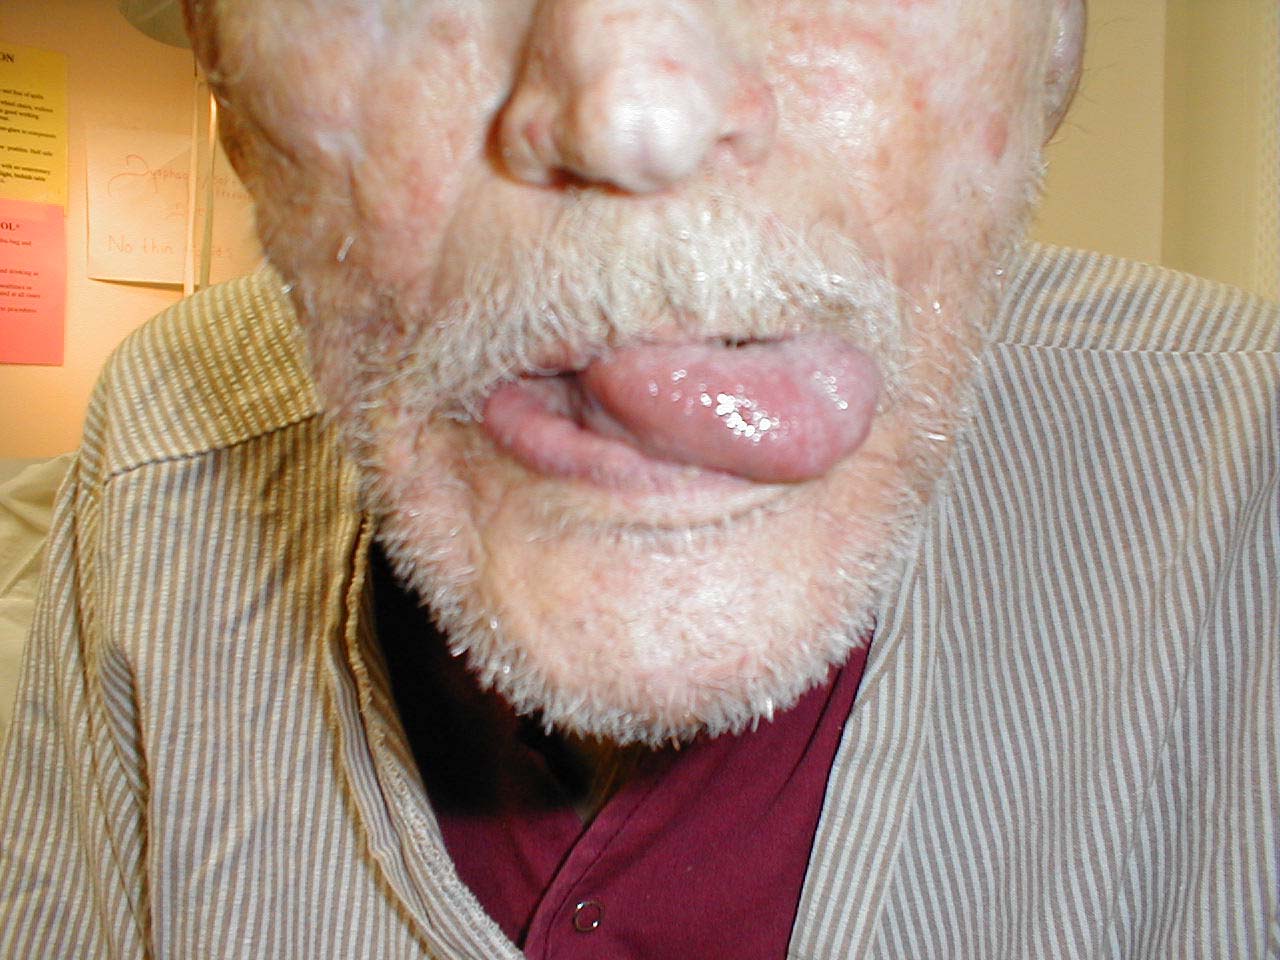 Left CN 12 Dysfunction: Stroke has resulted in L CN 12 Palsy. Tongue therefore deviates to the left.